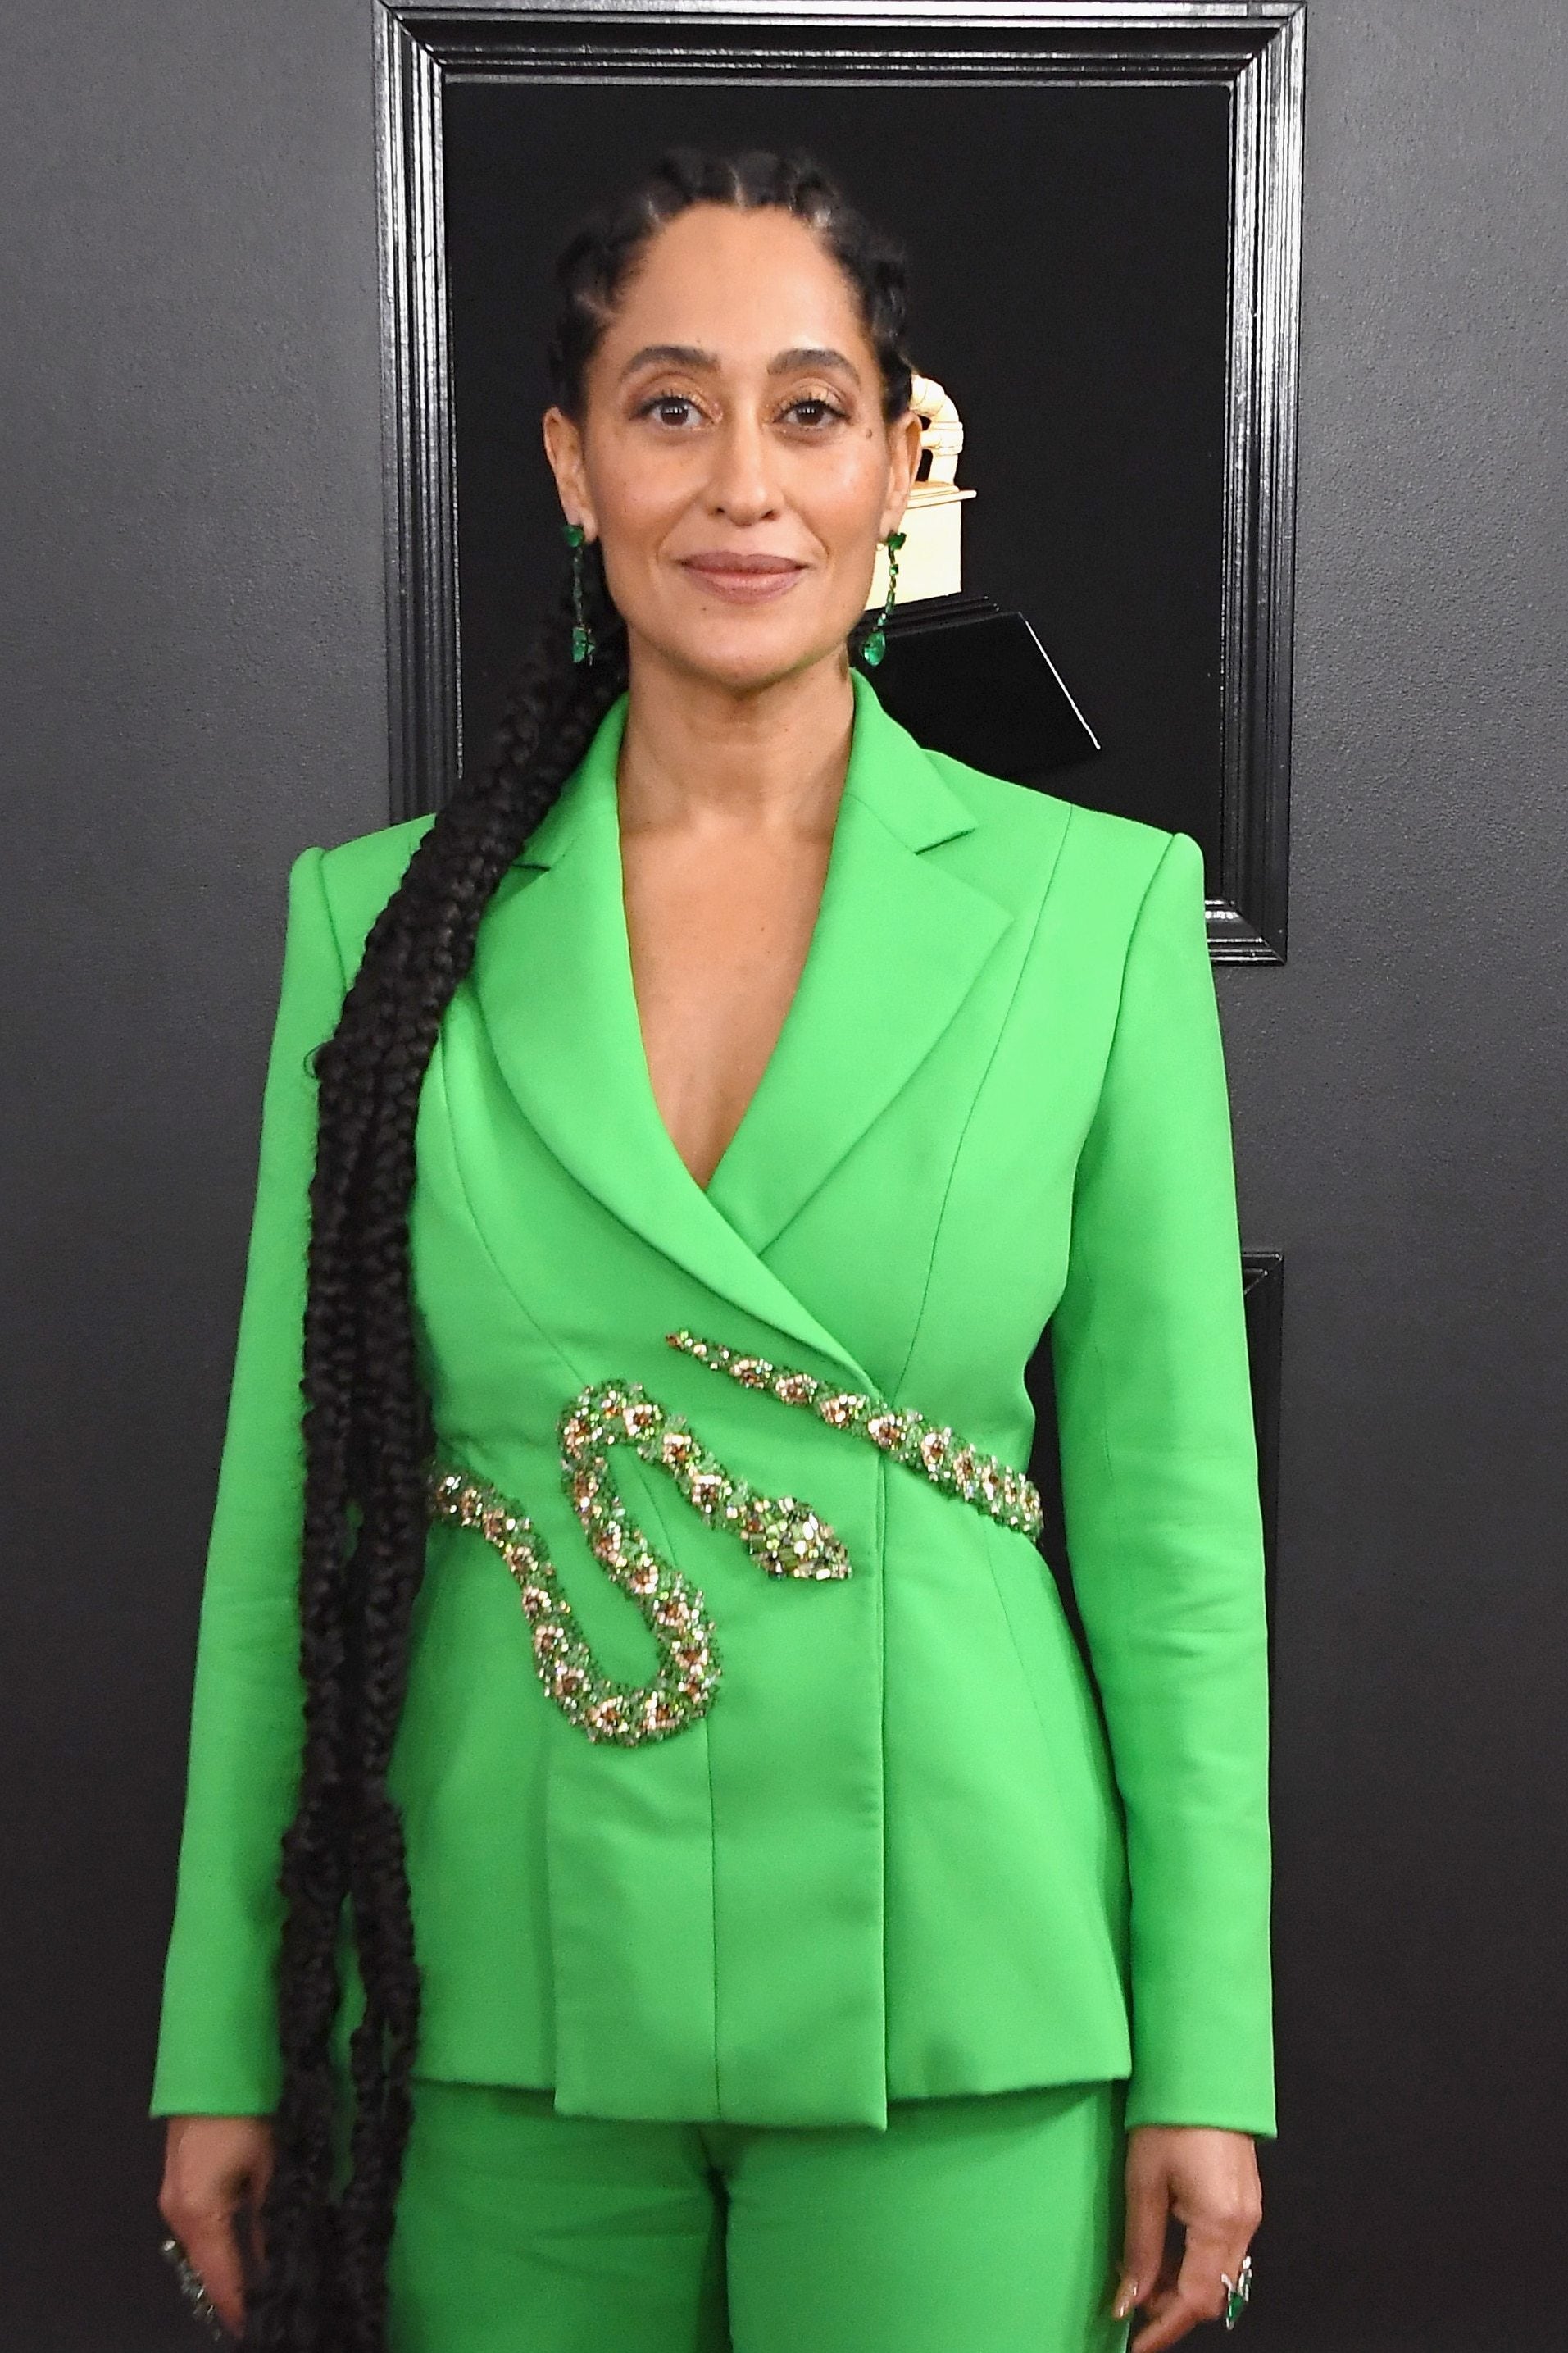 Tracee Ellis Ross’s Green Grammys Look Has Us In a Suit-Shopping Frenzy